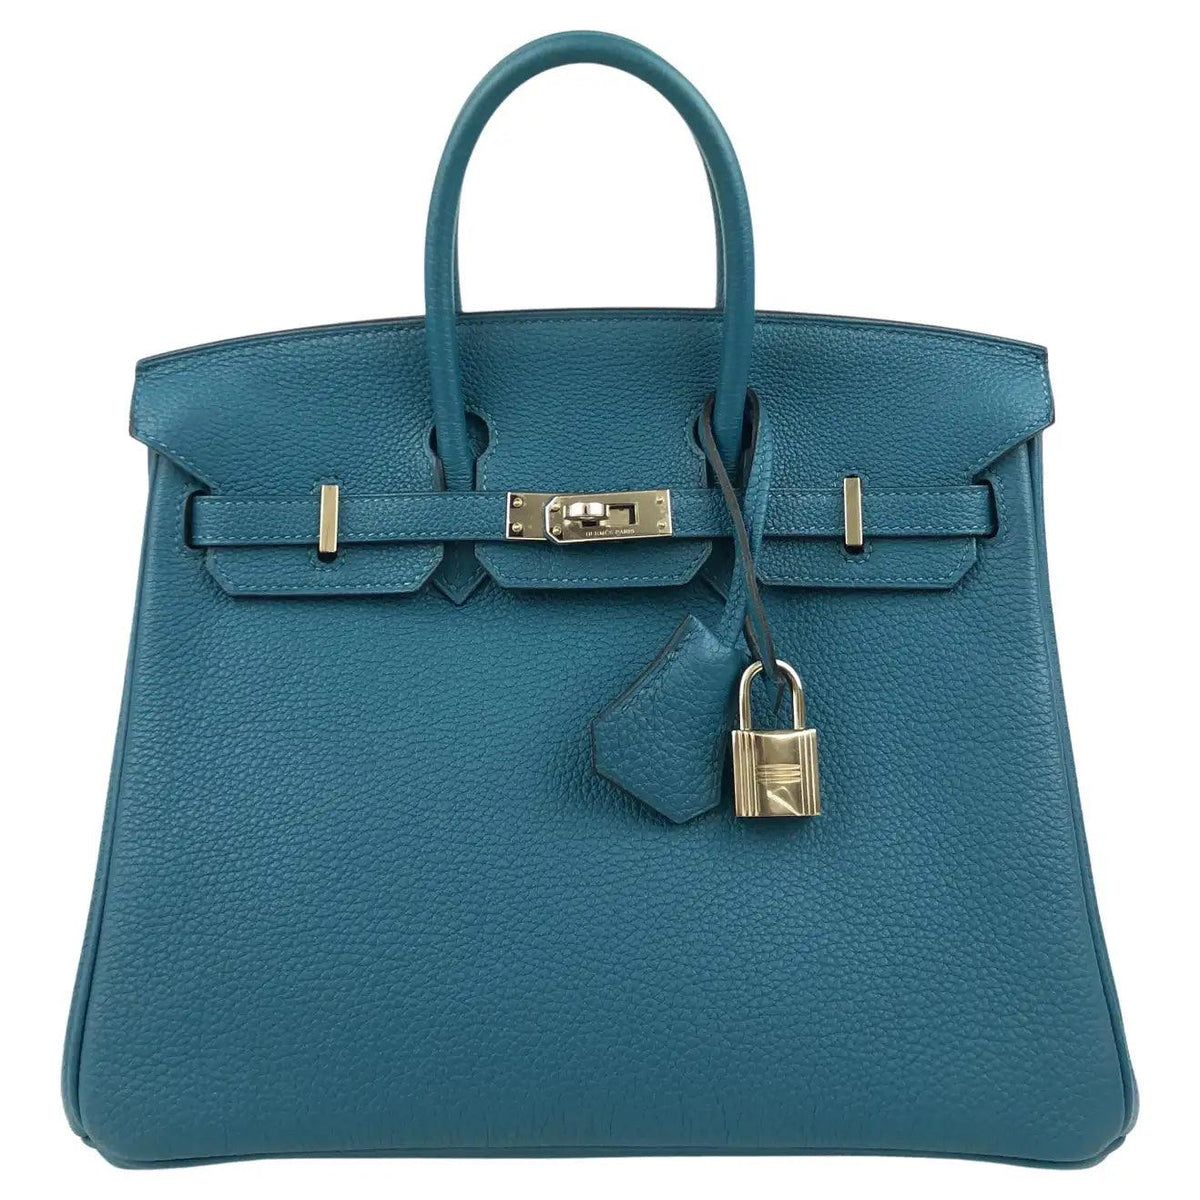 Pre- owned Rare HERMES Birkin 25 Colvert Blue Togo Leather Bag - theREMODA